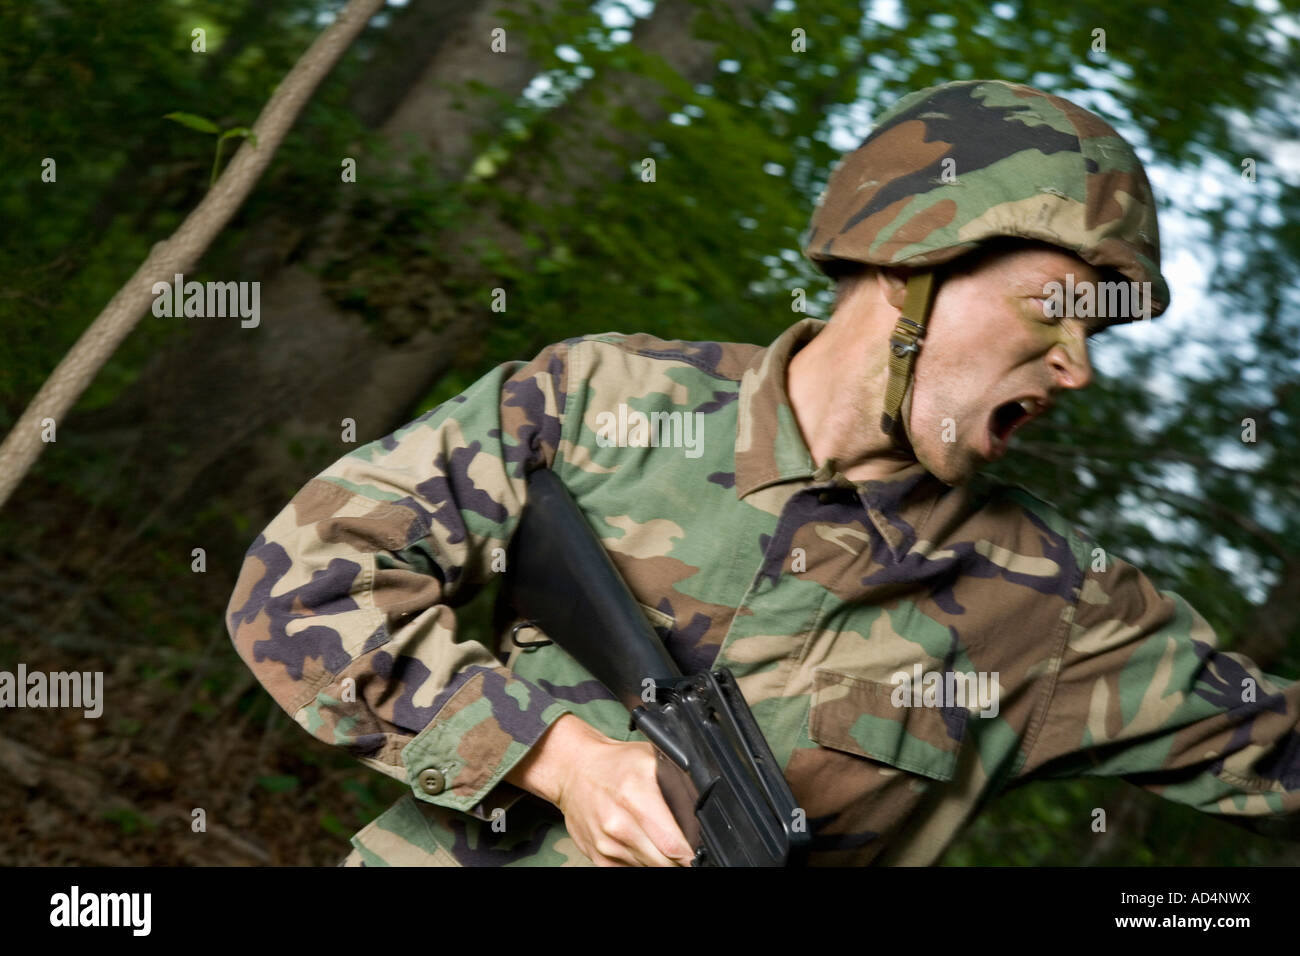 Soldier shouting Stock Photo